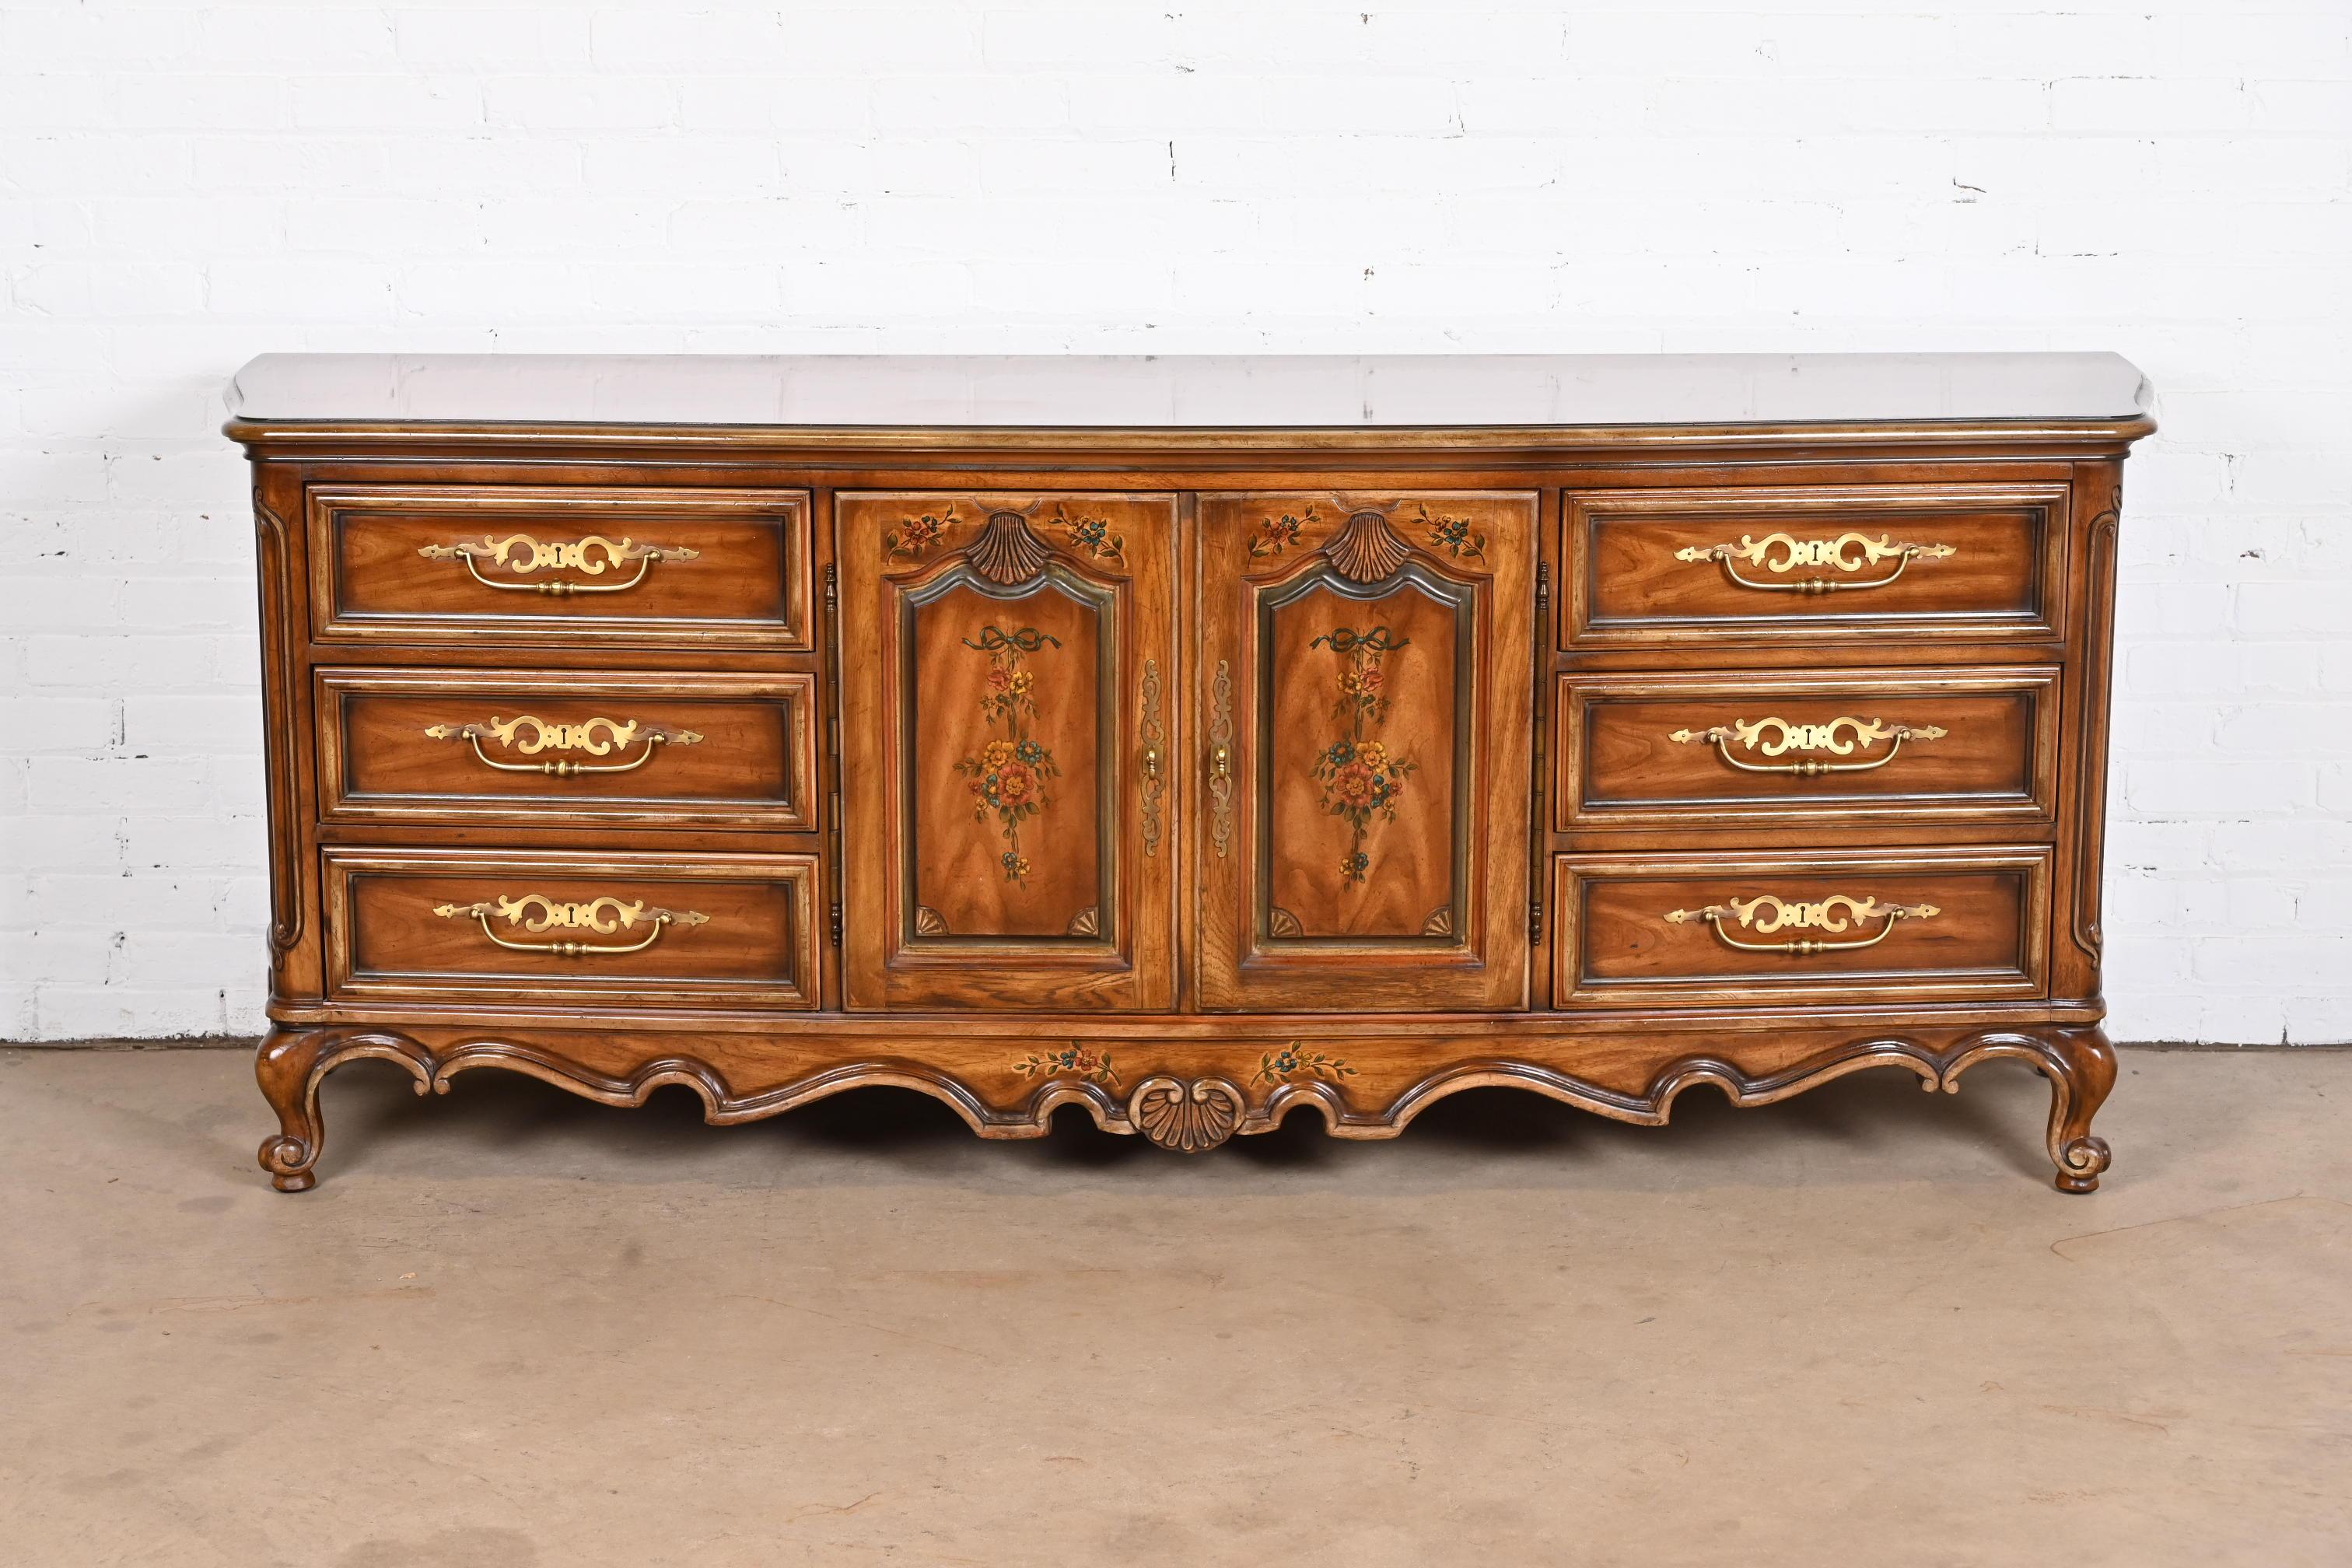 A gorgeous French Provincial Louis XV style long dresser or credenza.

By Drexel Heritage, 